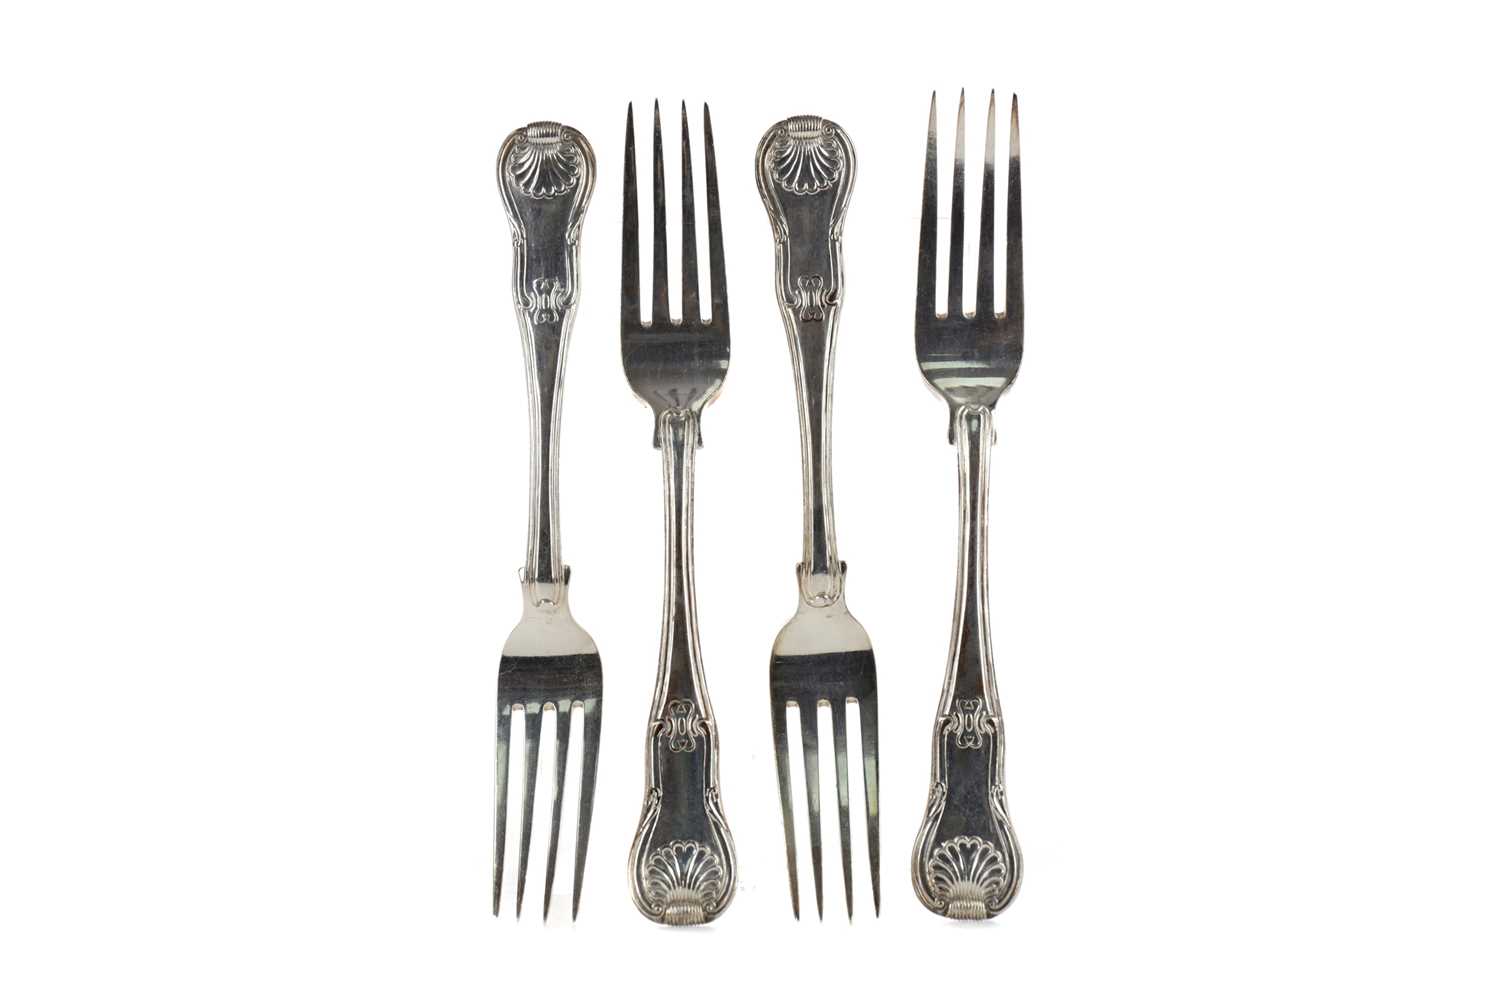 Lot 483 - A COMPOSITE SET OF EIGHTEEN GEORGE III SILVER KING'S PATTERN TABLE FORKS